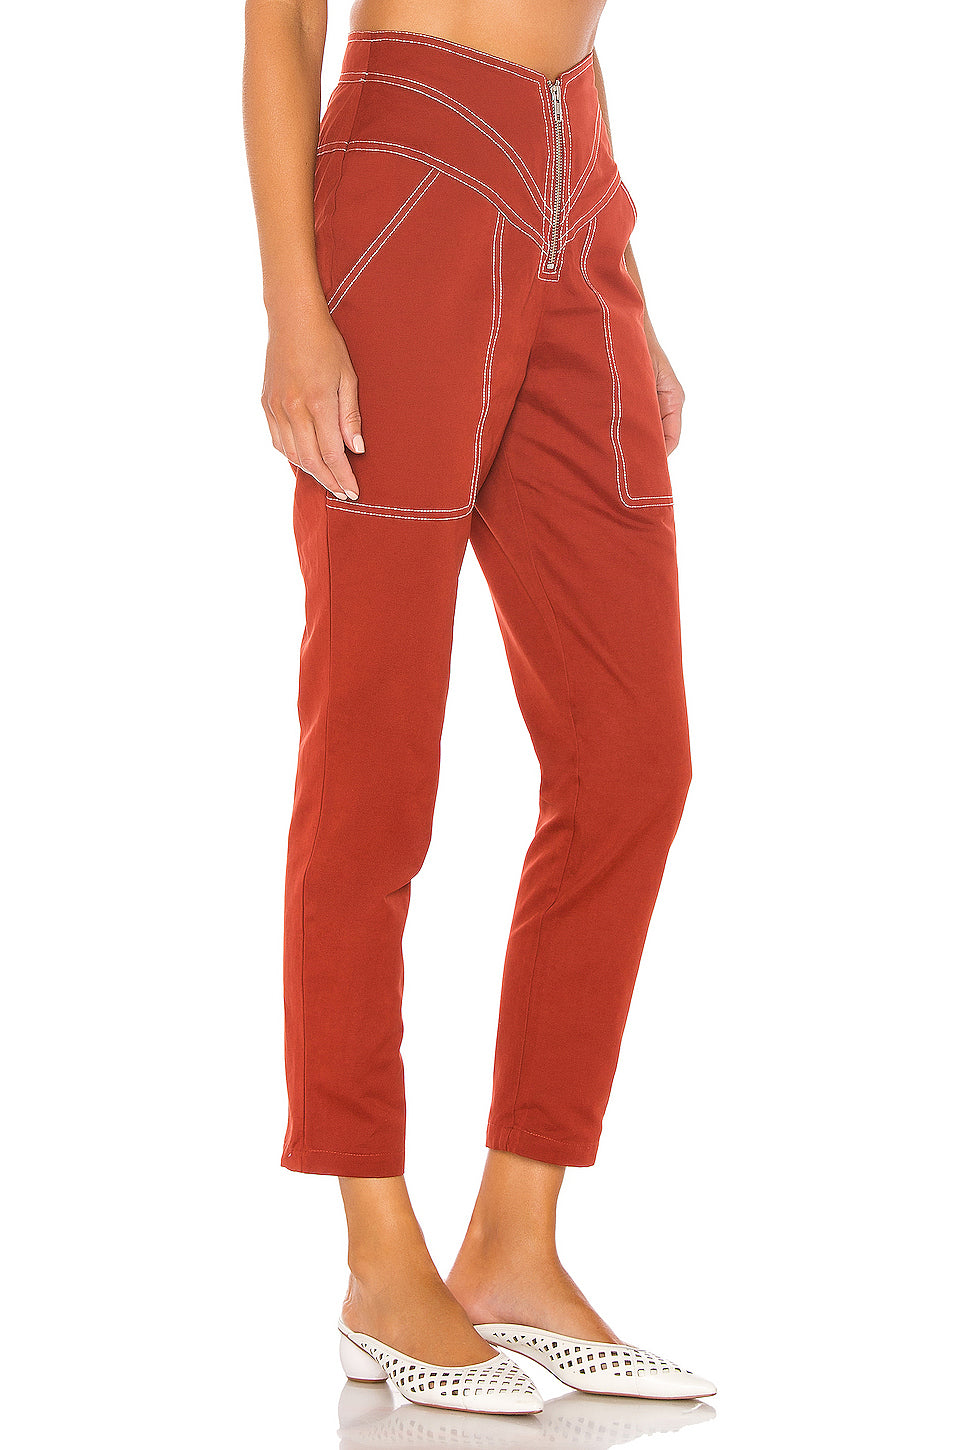 The Solana Pant in BRICK RED